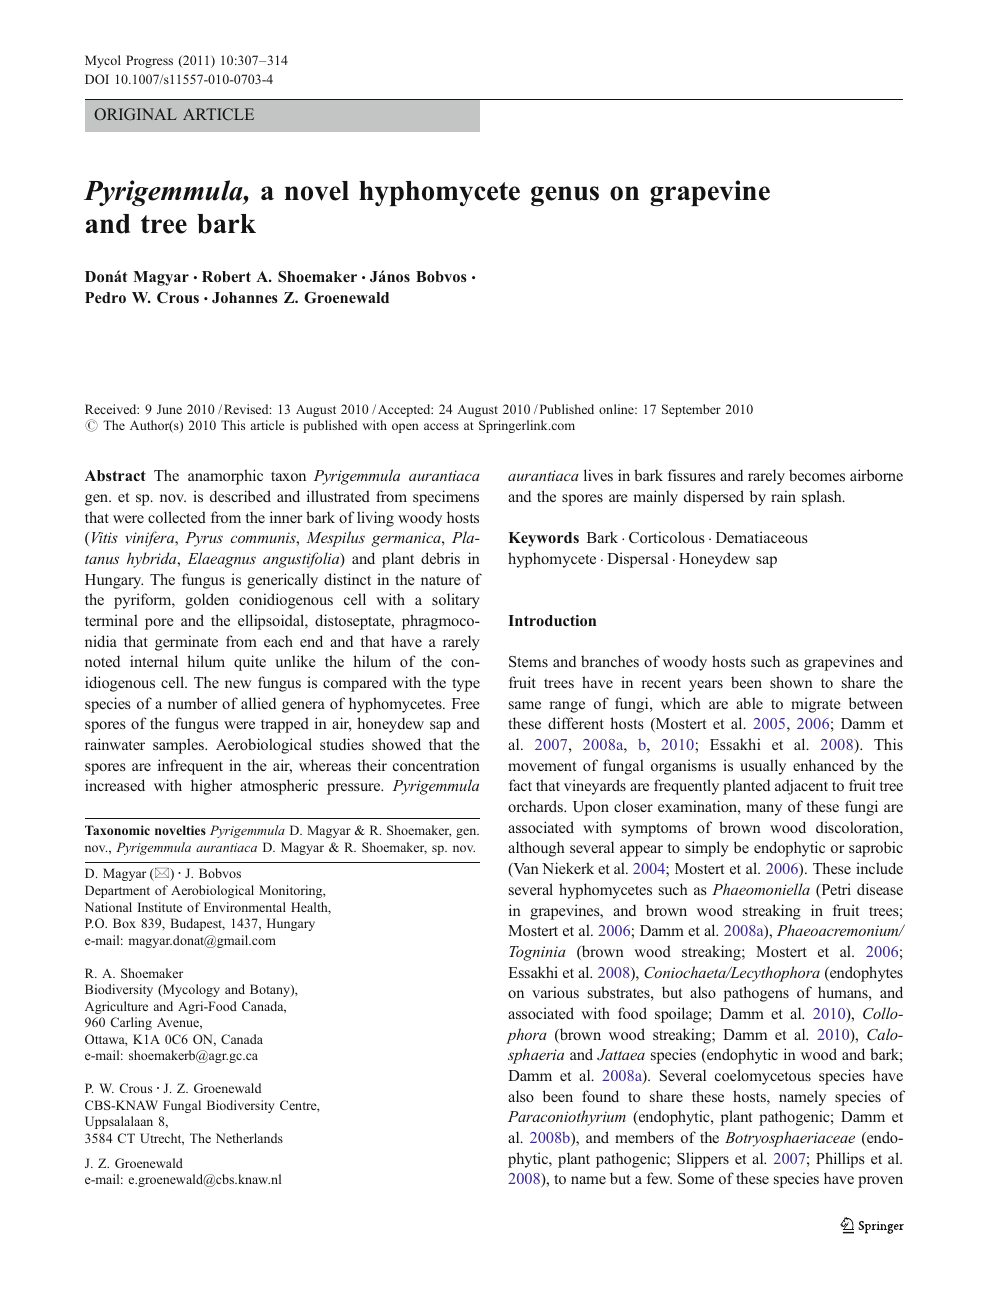 Pyrigemmula A Novel Hyphomycete Genus On Grapevine And Tree Bark Topic Of Research Paper In Biological Sciences Download Scholarly Article Pdf And Read For Free On Cyberleninka Open Science Hub